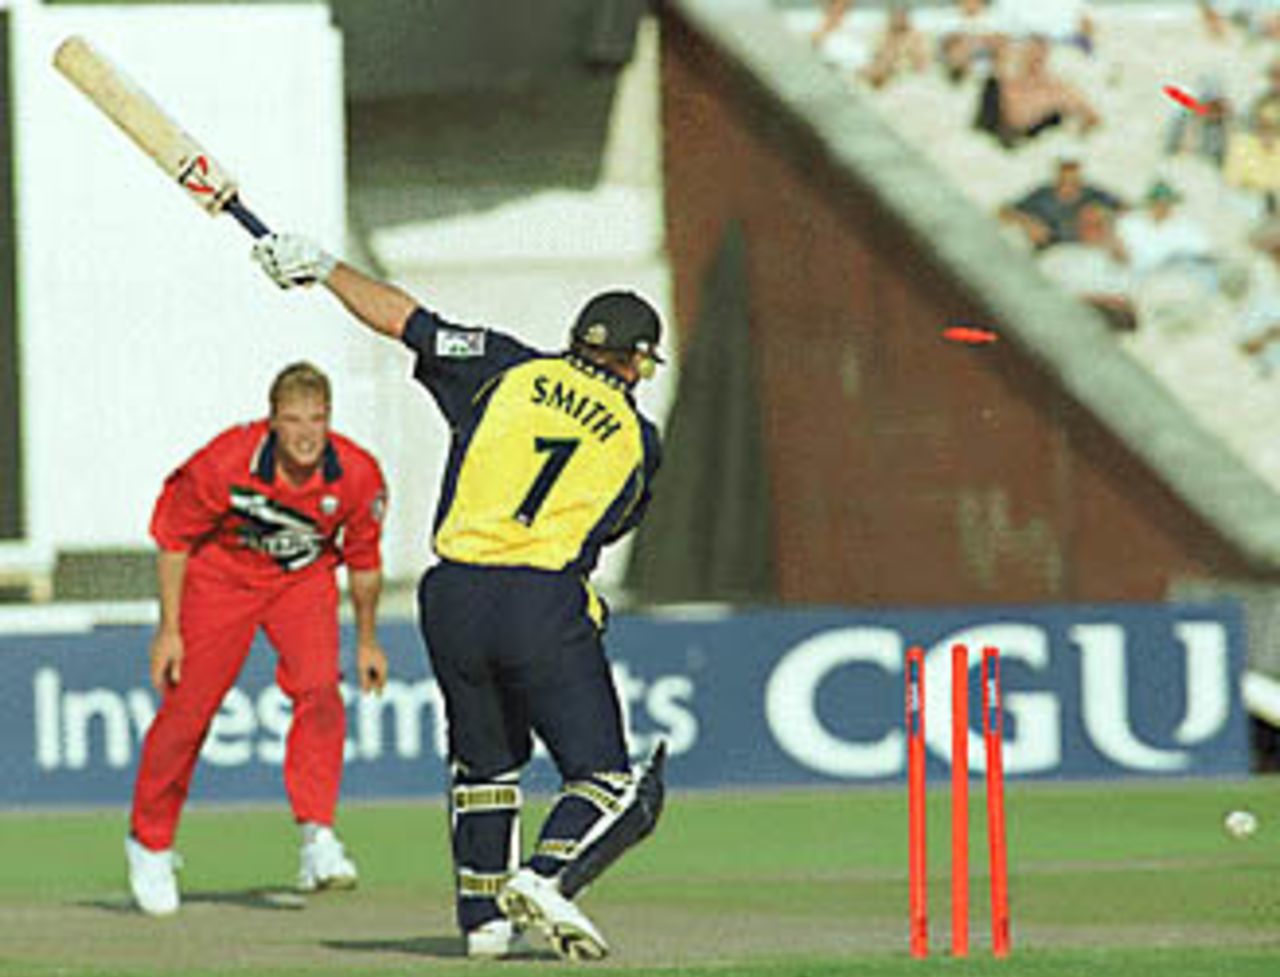 Robin Smith bowled by Andrew Flintoff, Hampshire v Lancashire, National League 1st Division, 6 September 1999